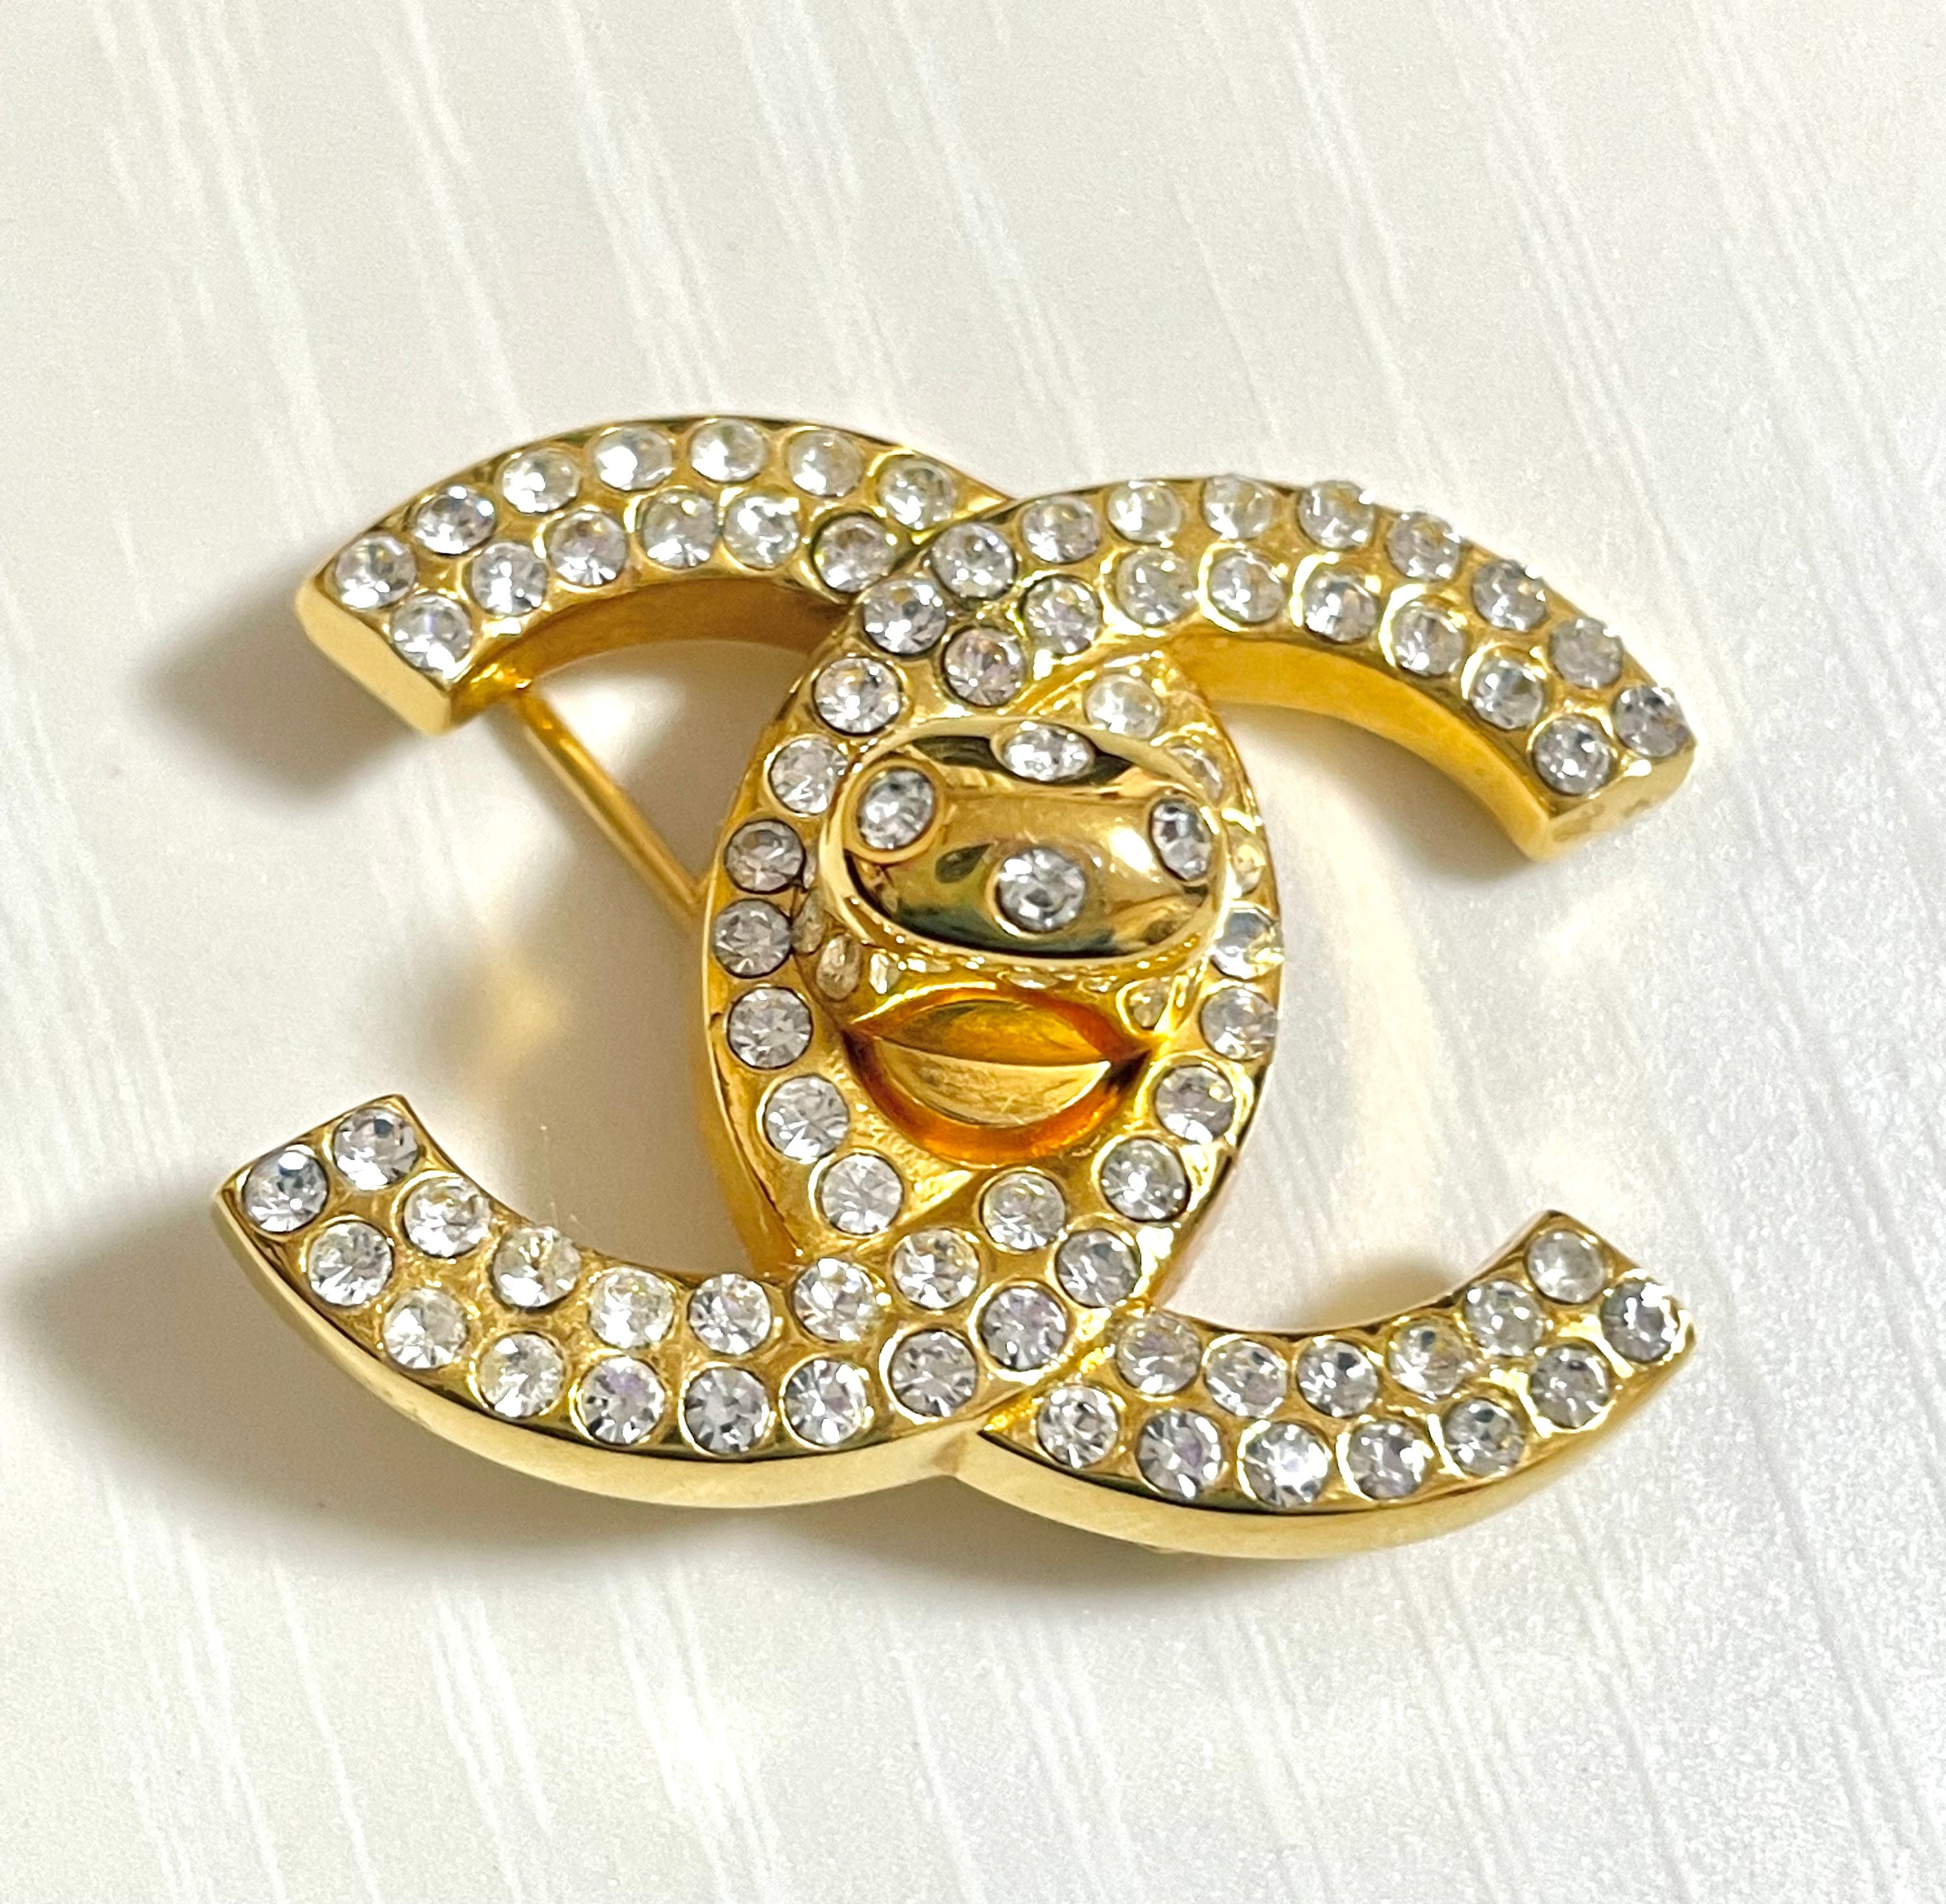 Vintage CHANEL golden turn lock CC pin brooch with crystals. Very